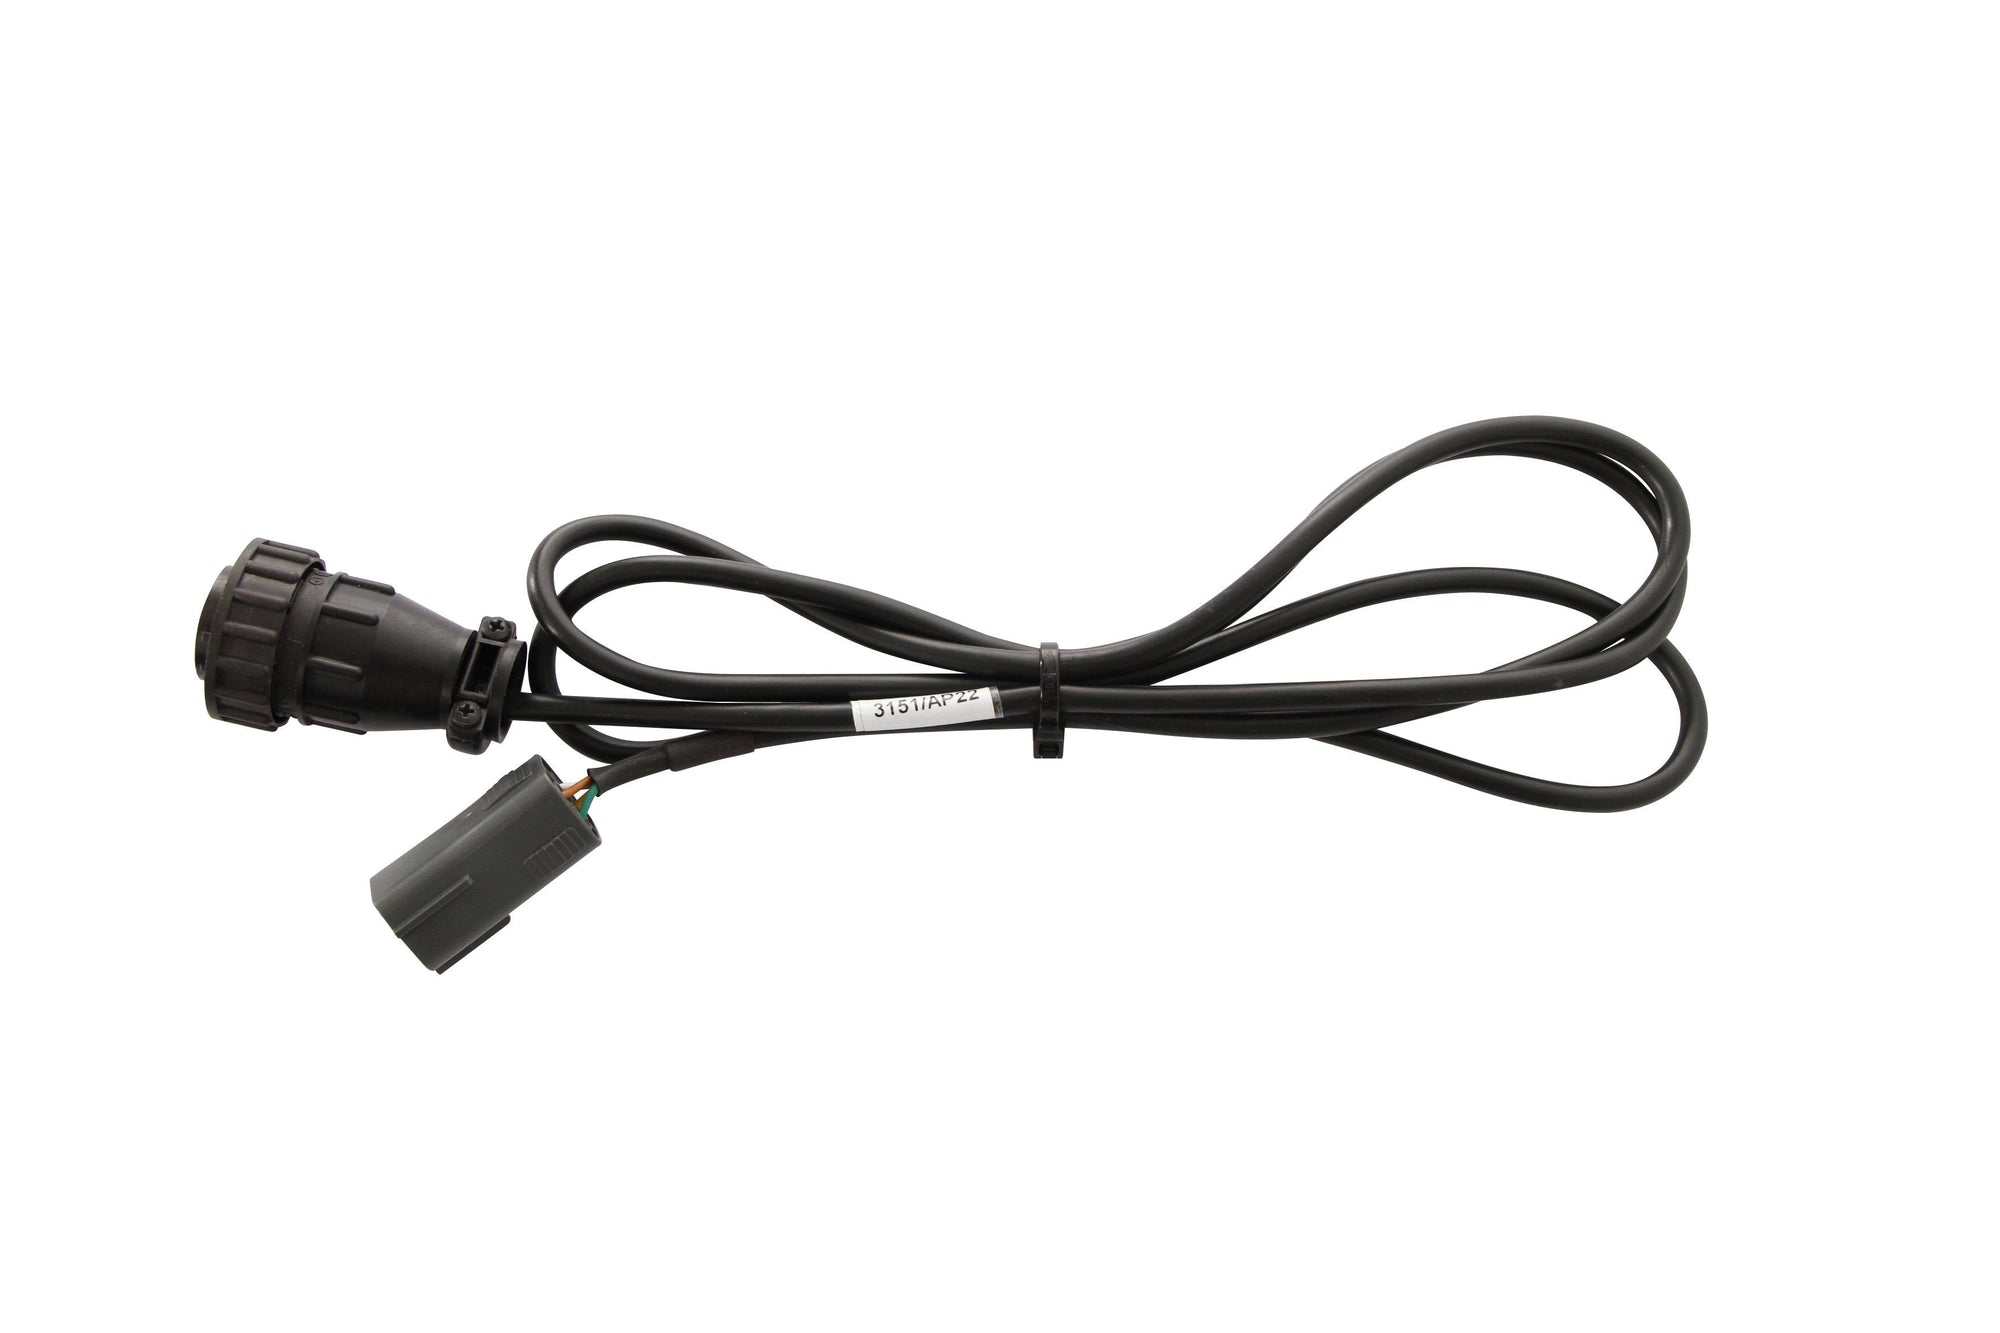 KAWASAKI Z750/Z1000 series from 2007 to 2009 cable (3151/AP22)